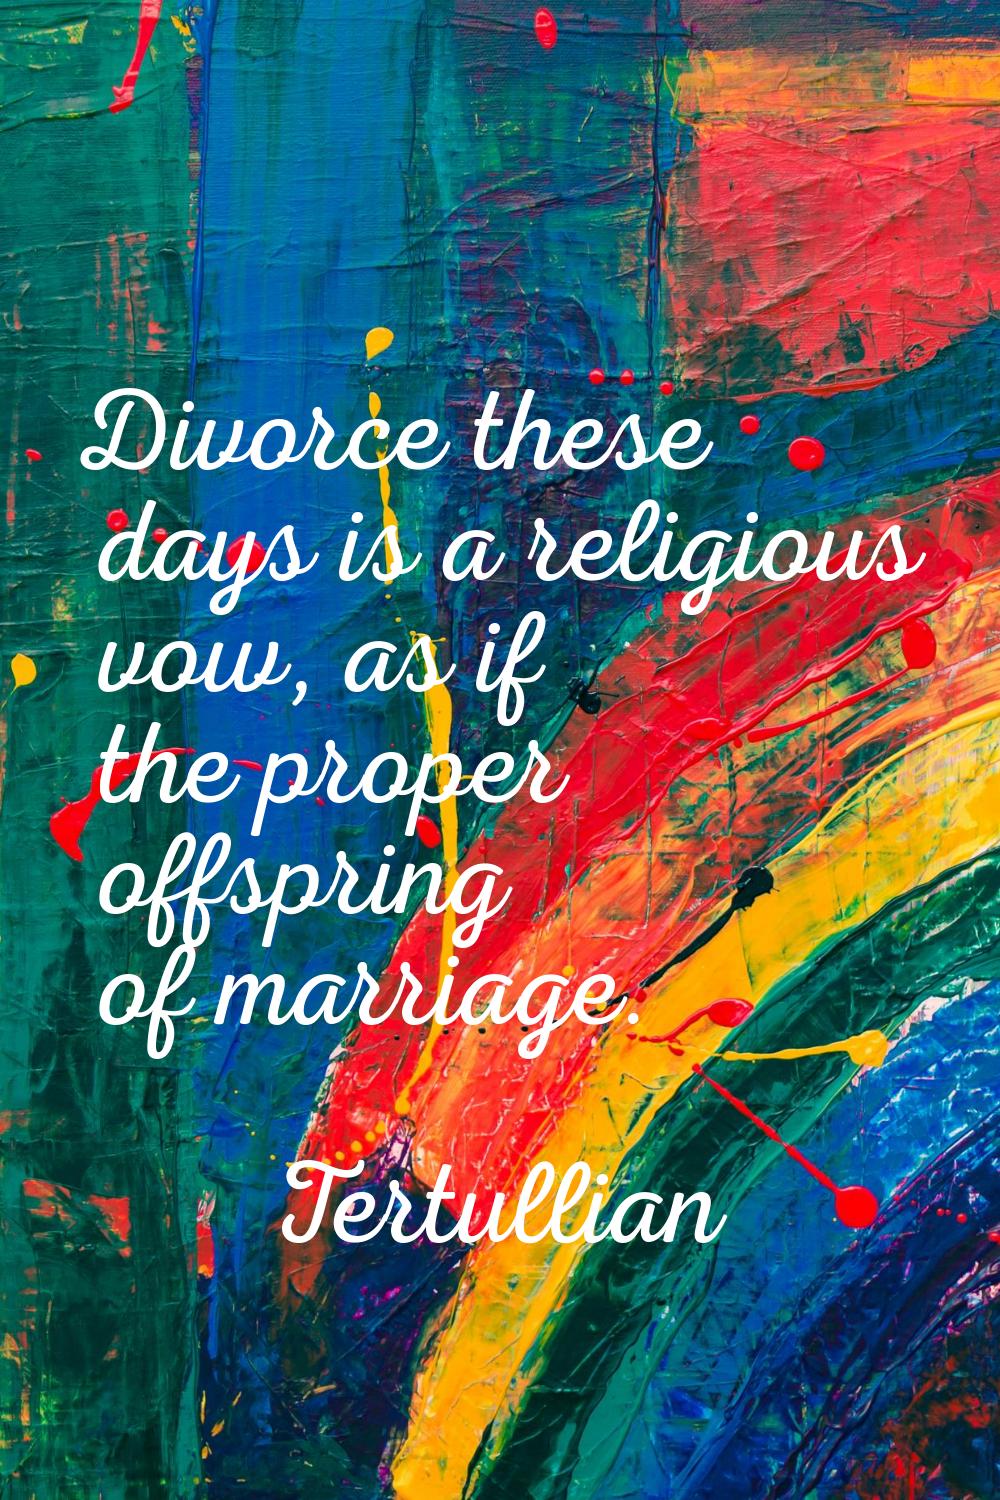 Divorce these days is a religious vow, as if the proper offspring of marriage.